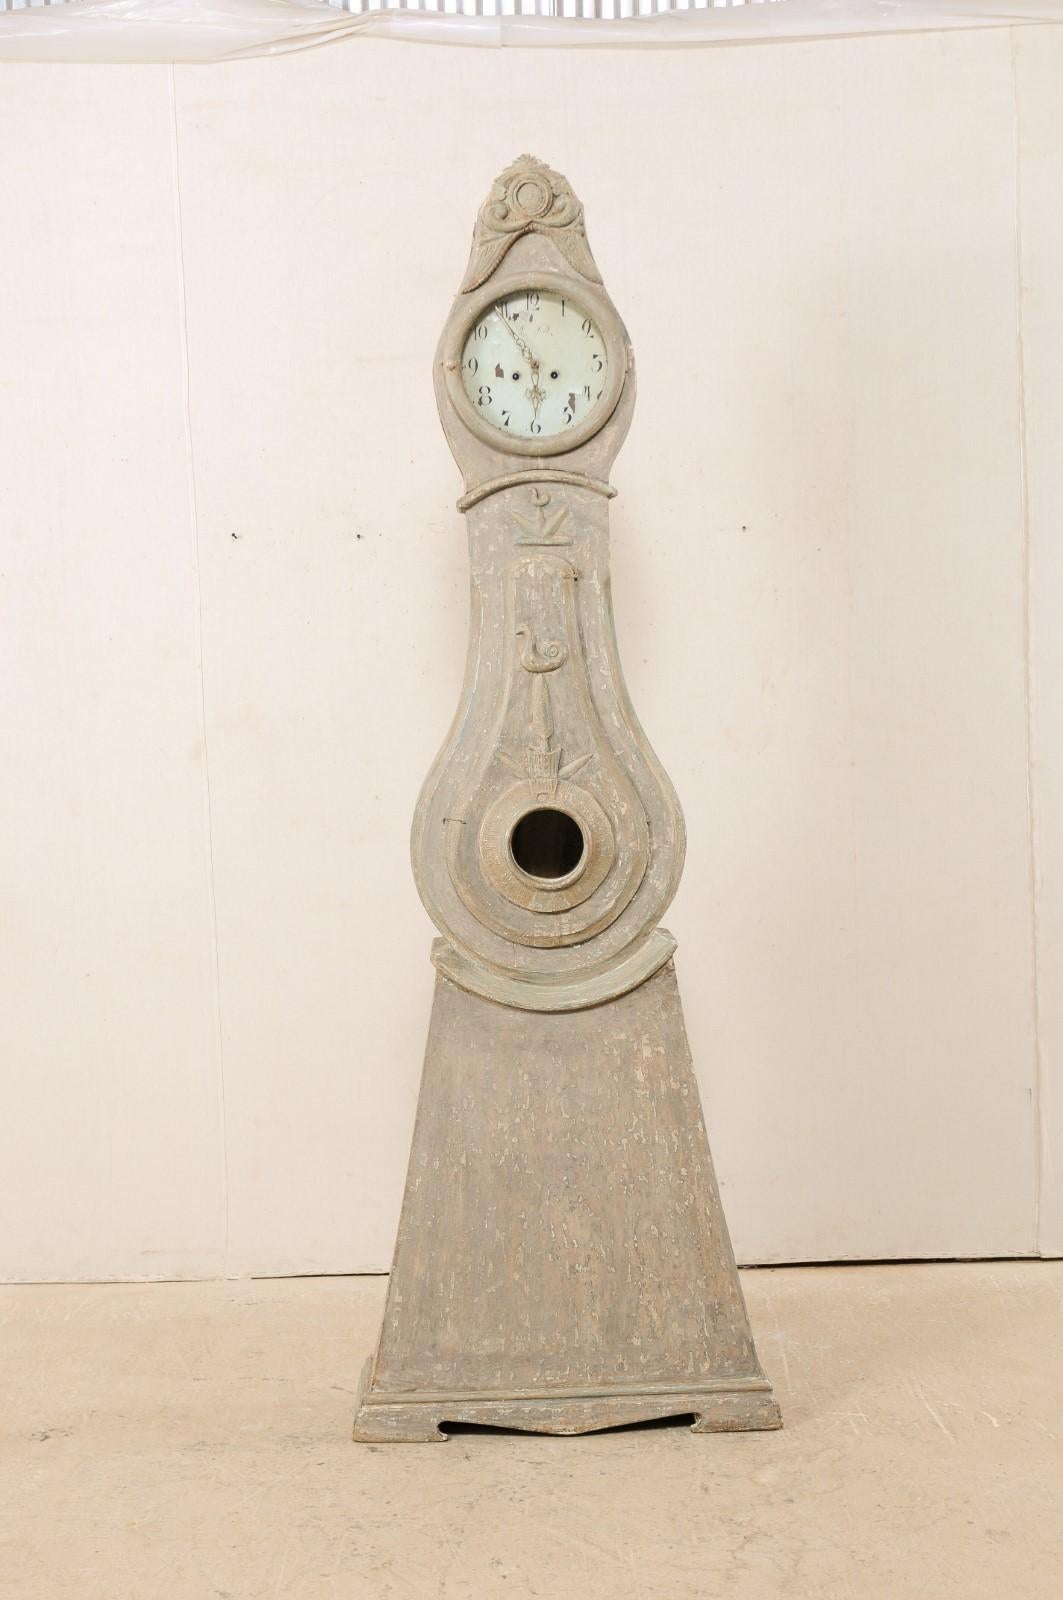 An early 19th century Northern Swedish painted wood grandfather clock with nice trimmings. This antique floor clock from Norrbotten County, Sweden (Northern region) features a nicely carved, exaggerated and raised crest with small fan over a center